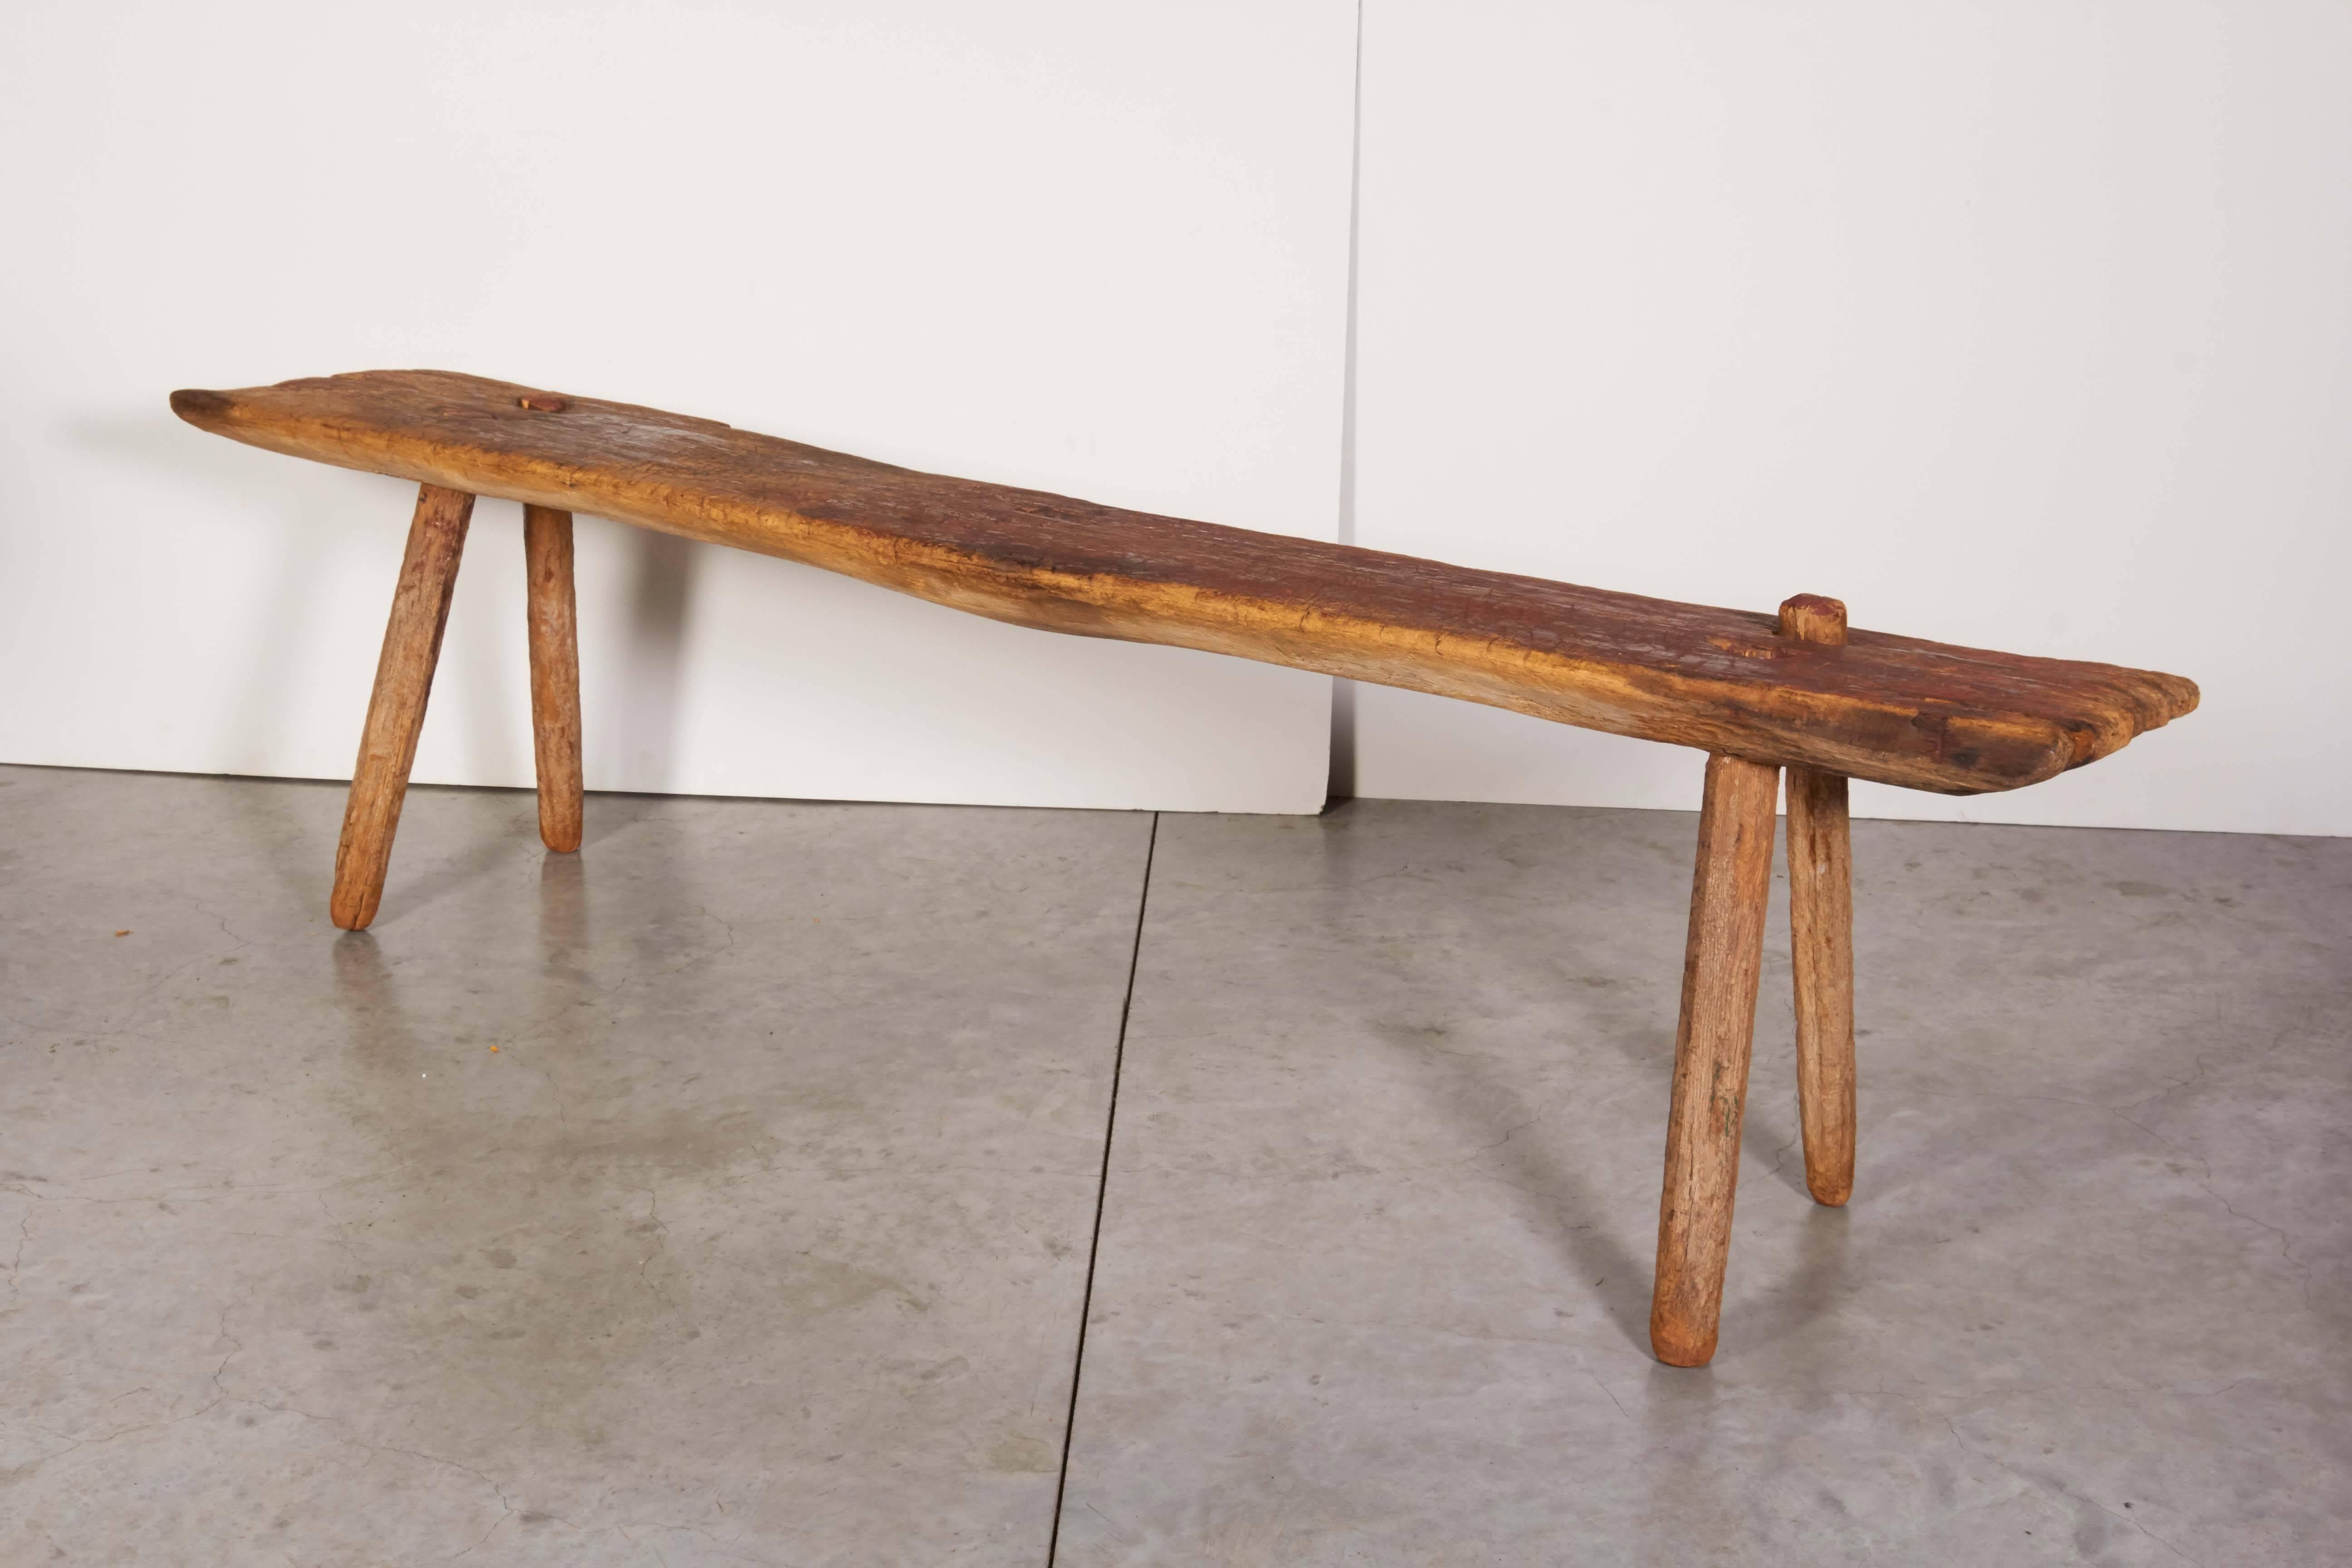 An incredible and unusual Primitive bench with a thick seat, simple legs and a wonderful faded red color that can only be created by years outdoors in the sun. The long seat is very thick, shows the hand of the maker and the impact of time on this